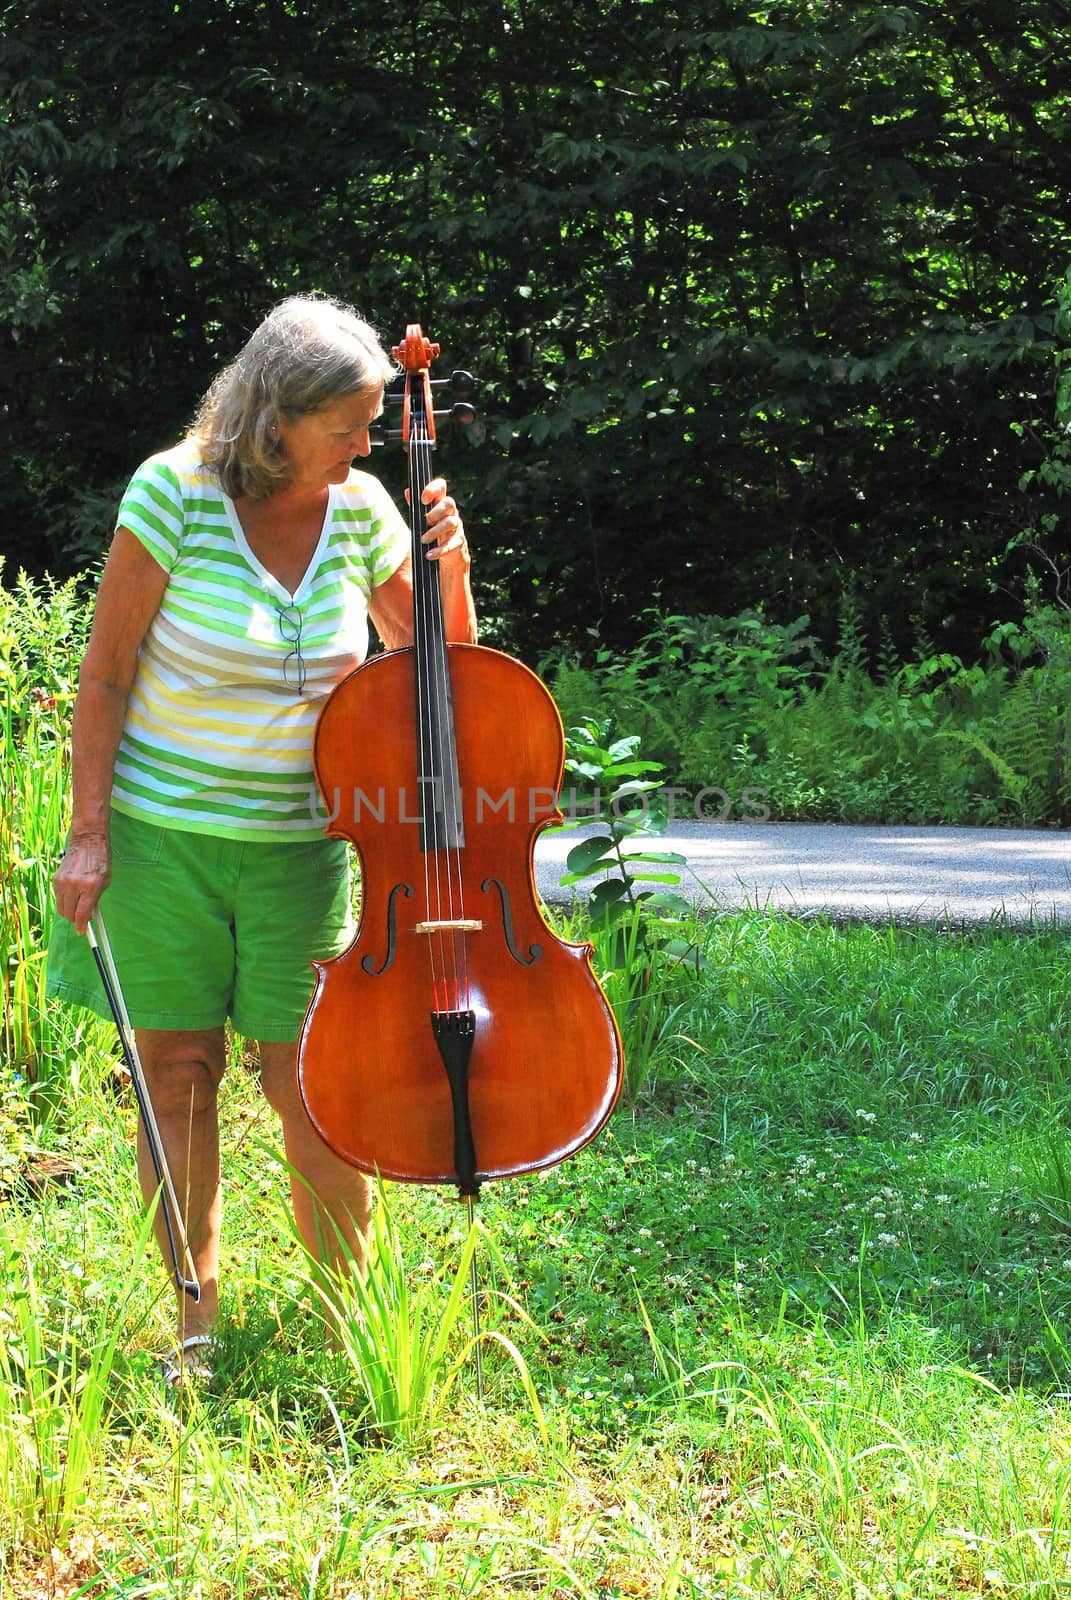 Mature female cellist with her instrument outside.